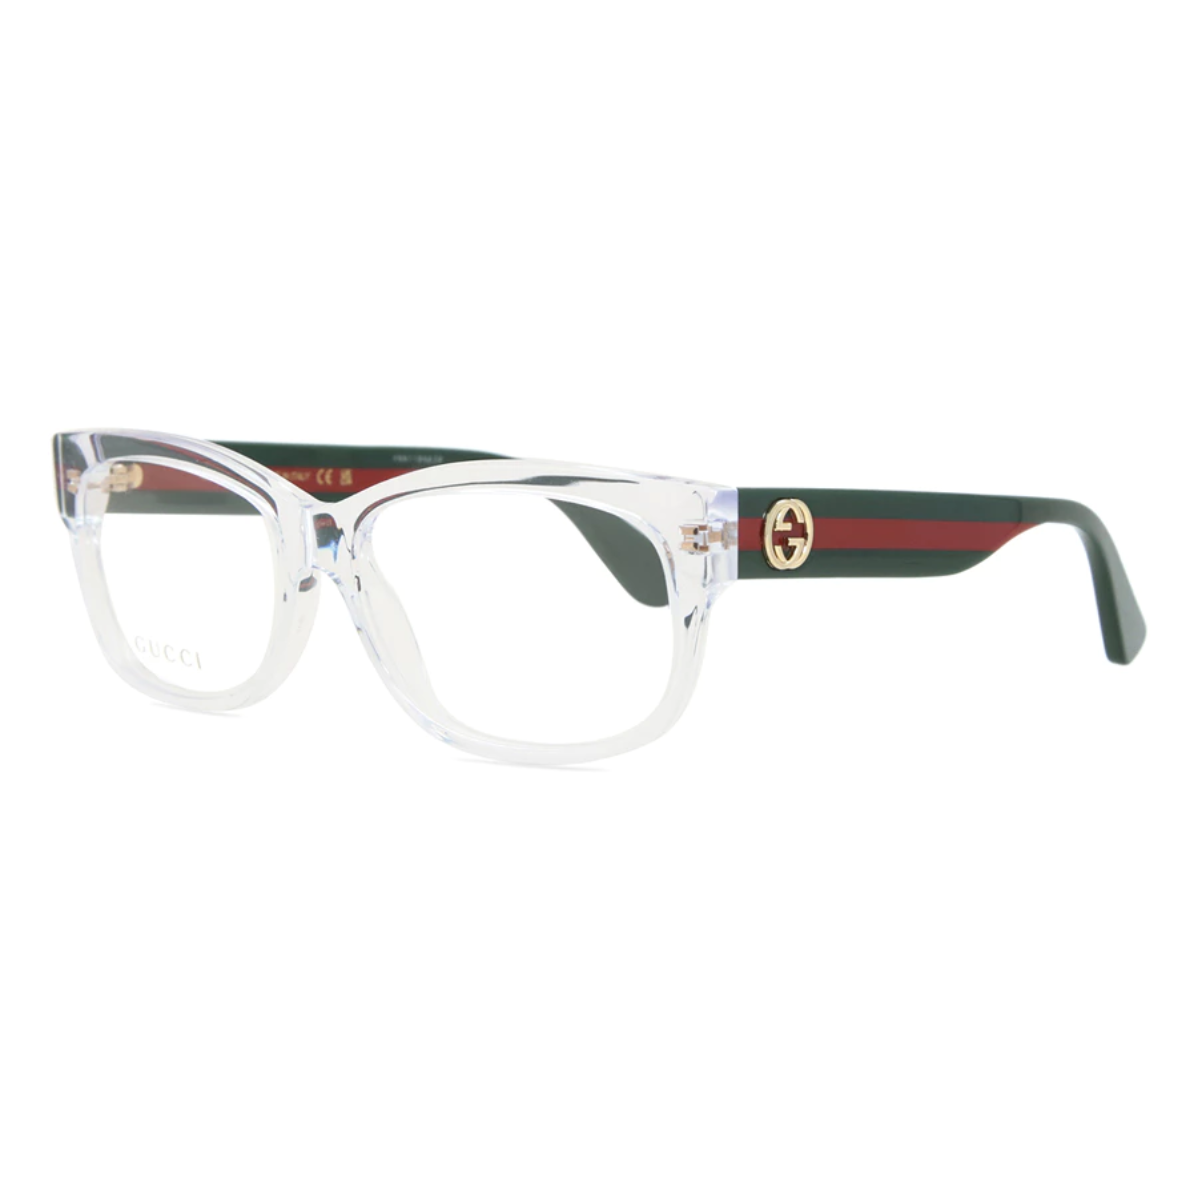 "Chic Gucci 0278O Spectacle Frames for All OPTORIUM"